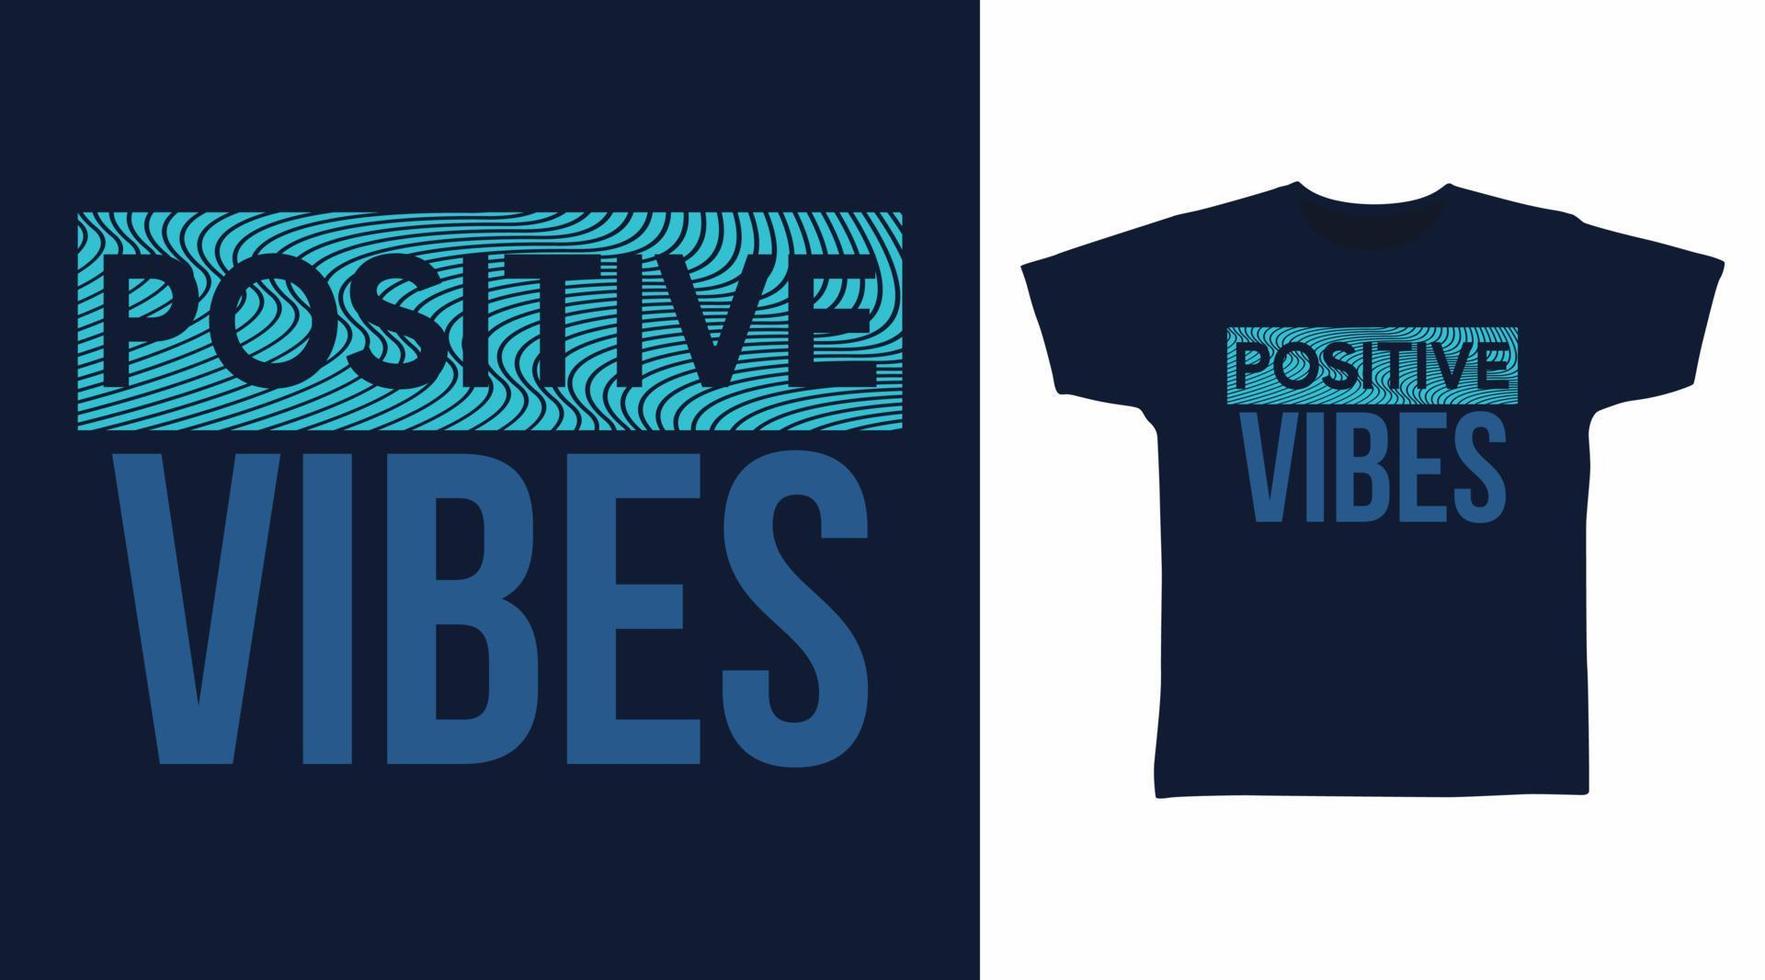 Positive vibes typography art design vector illustration ready for print on t-shirt